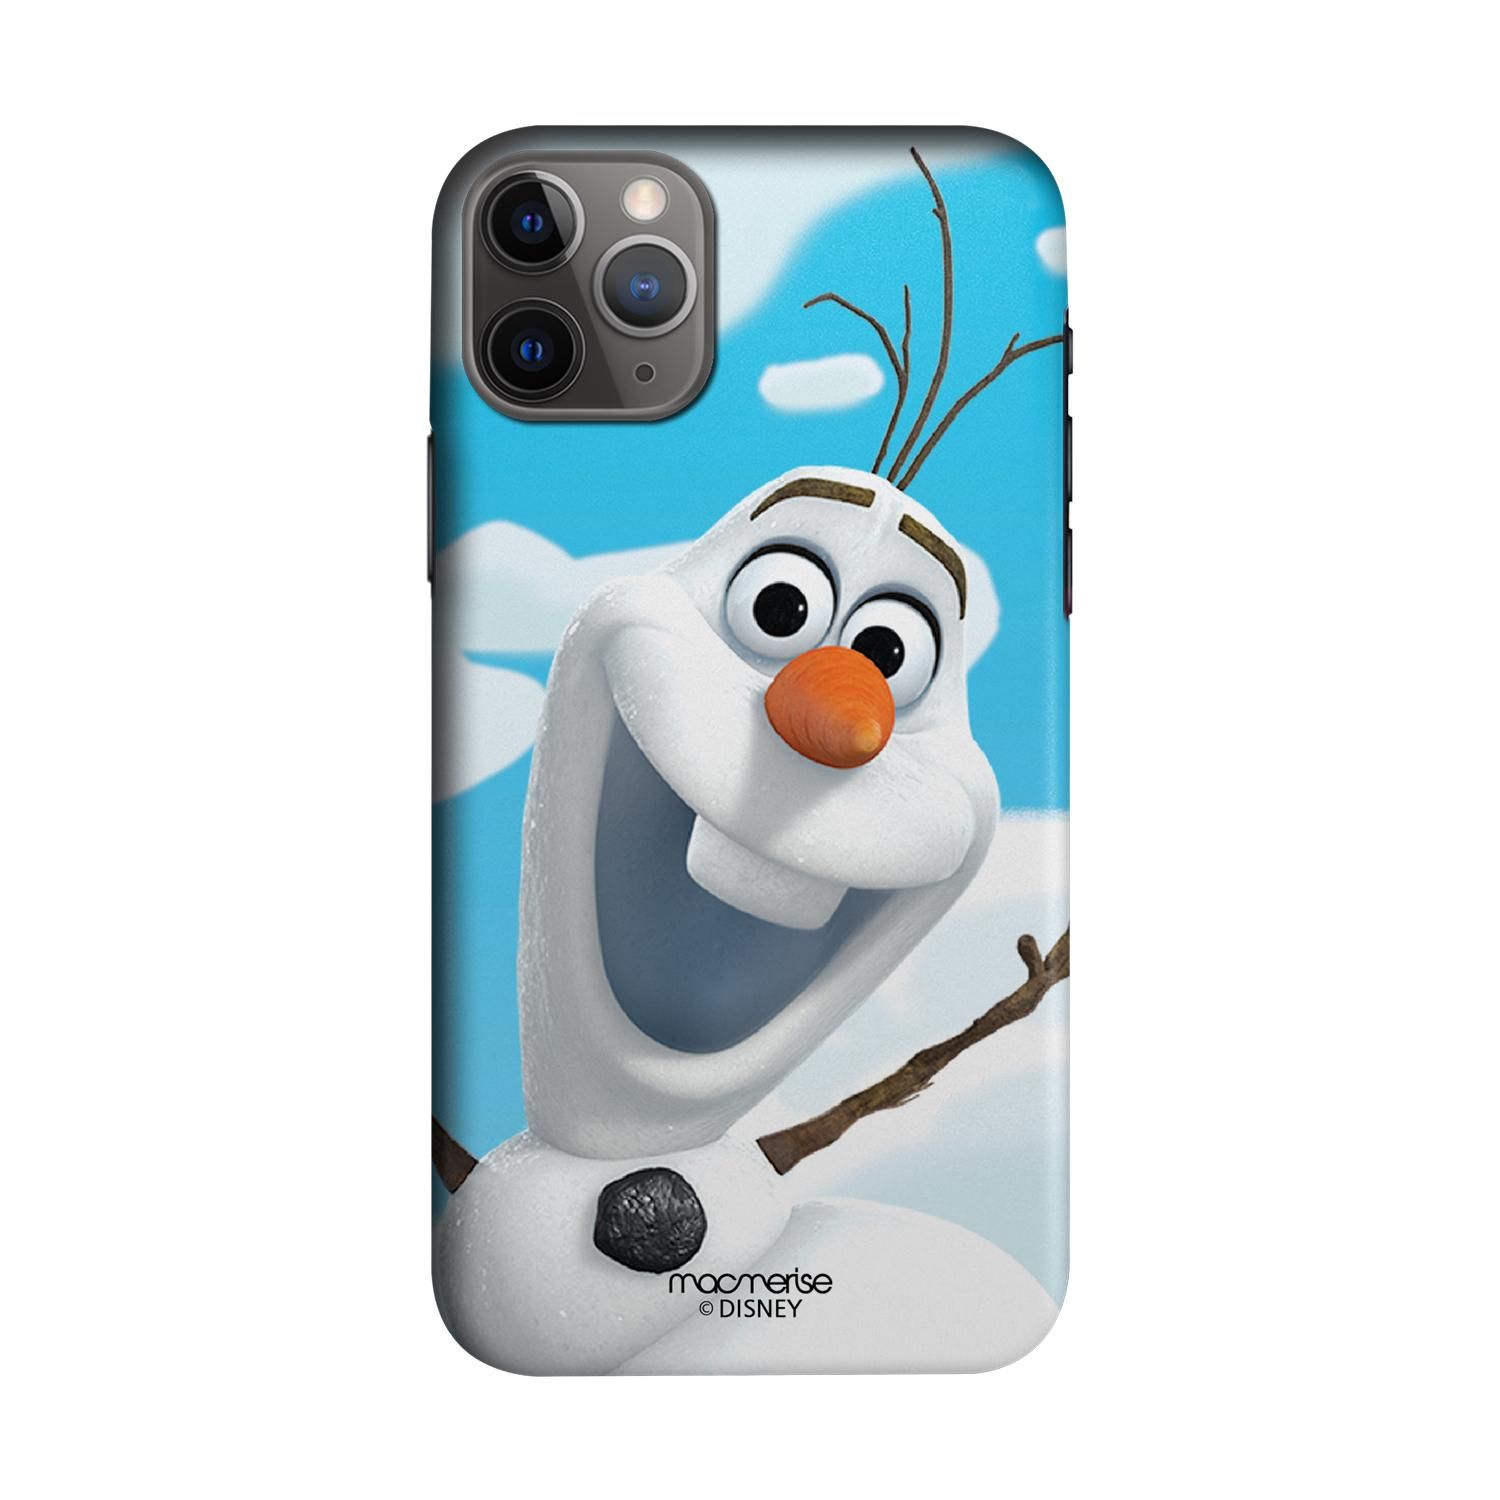 Oh Olaf - Sleek Phone Case for iPhone 11 Pro